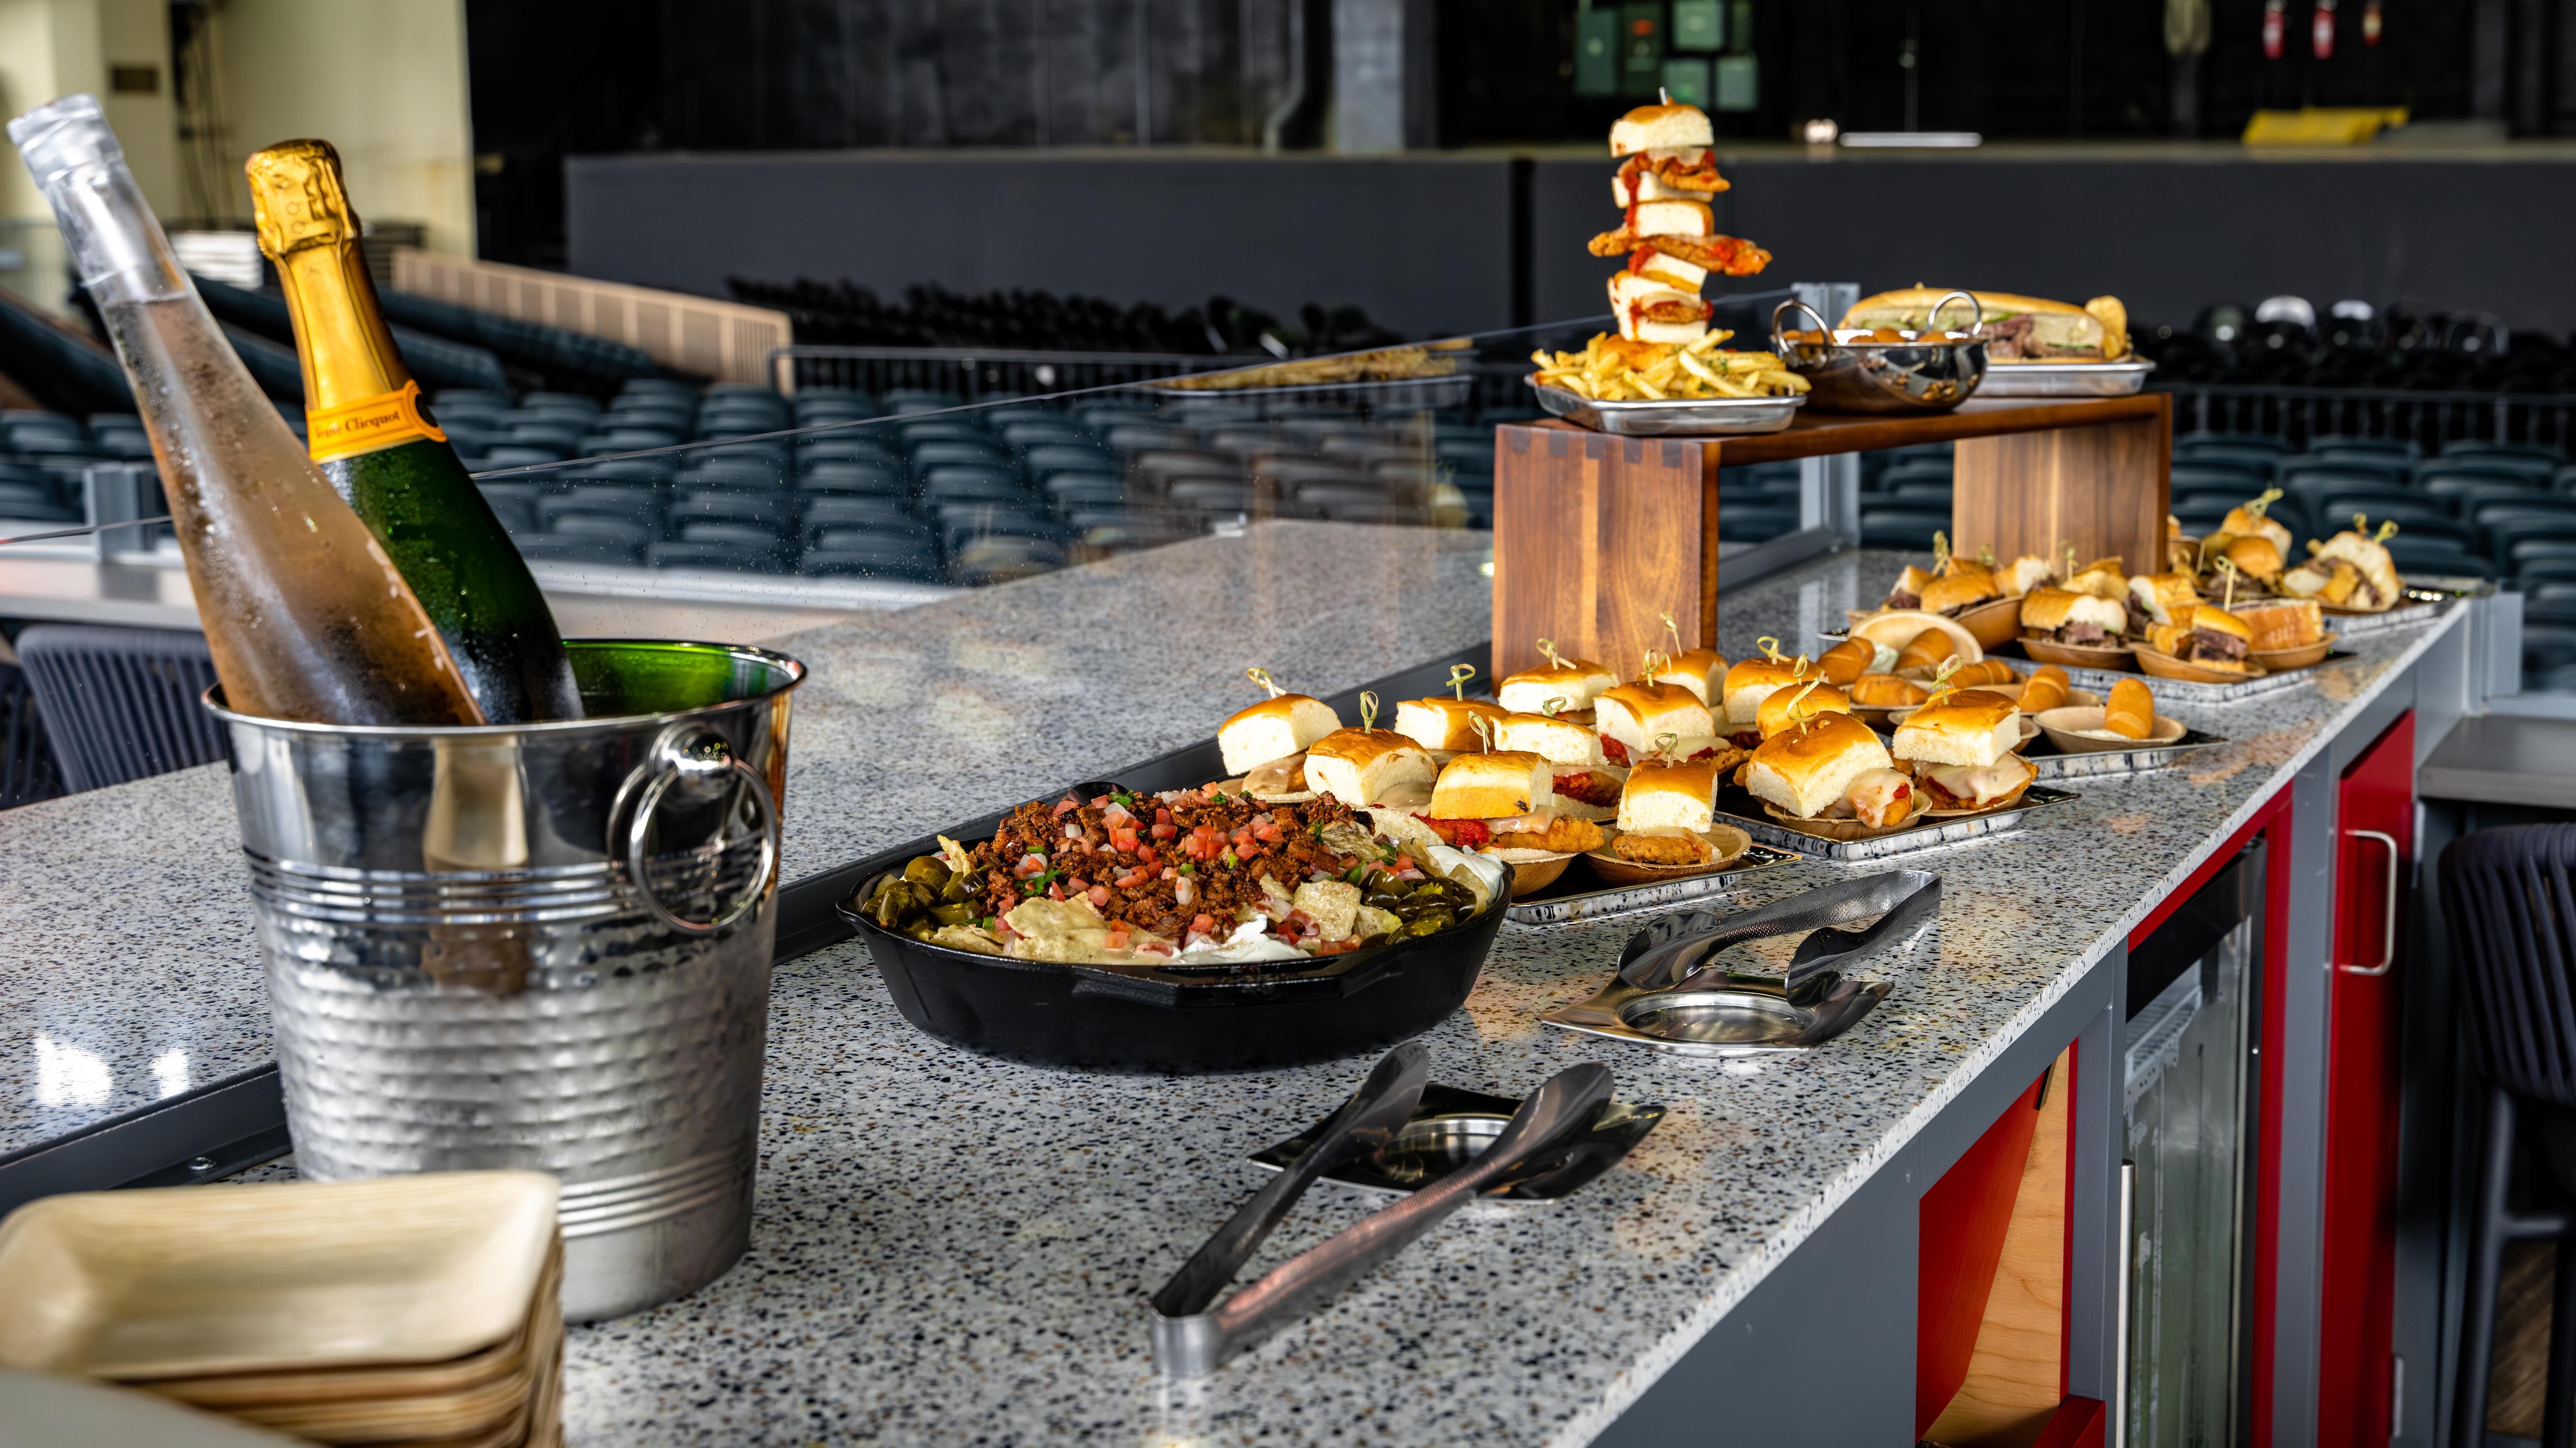 A table holds a bucket with two bottles of wine, nachos in a cast iron skillet, plates of sliders. In the background, there’s a stage in an amphitheater.